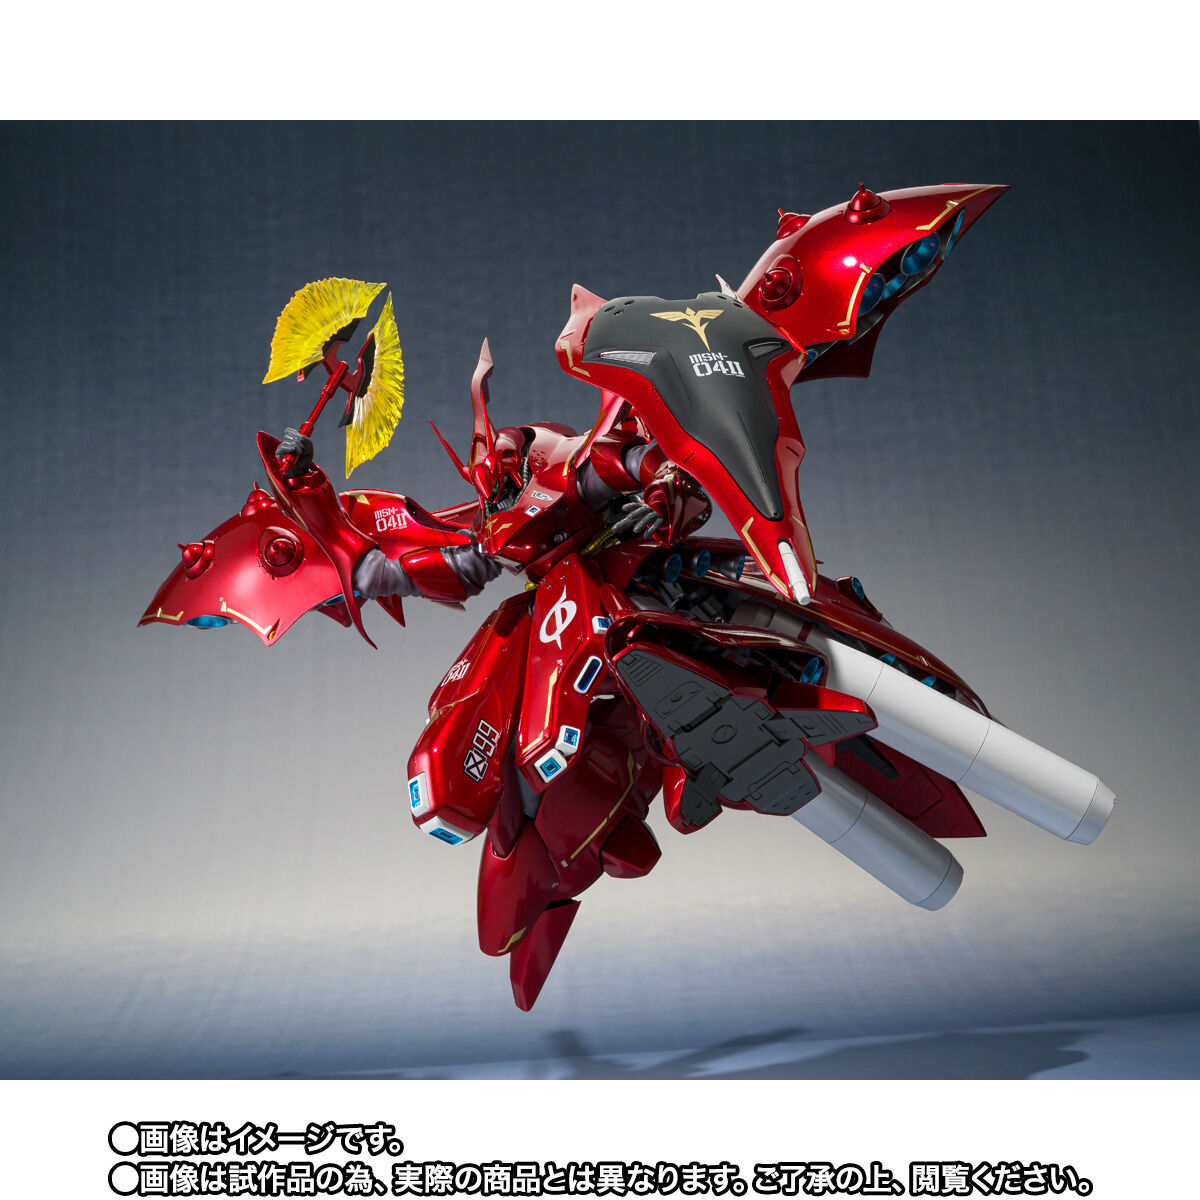 ROBOT魂 ＜SIDE MS＞ ナイチンゲール ～CHAR's SPECIAL COLOR